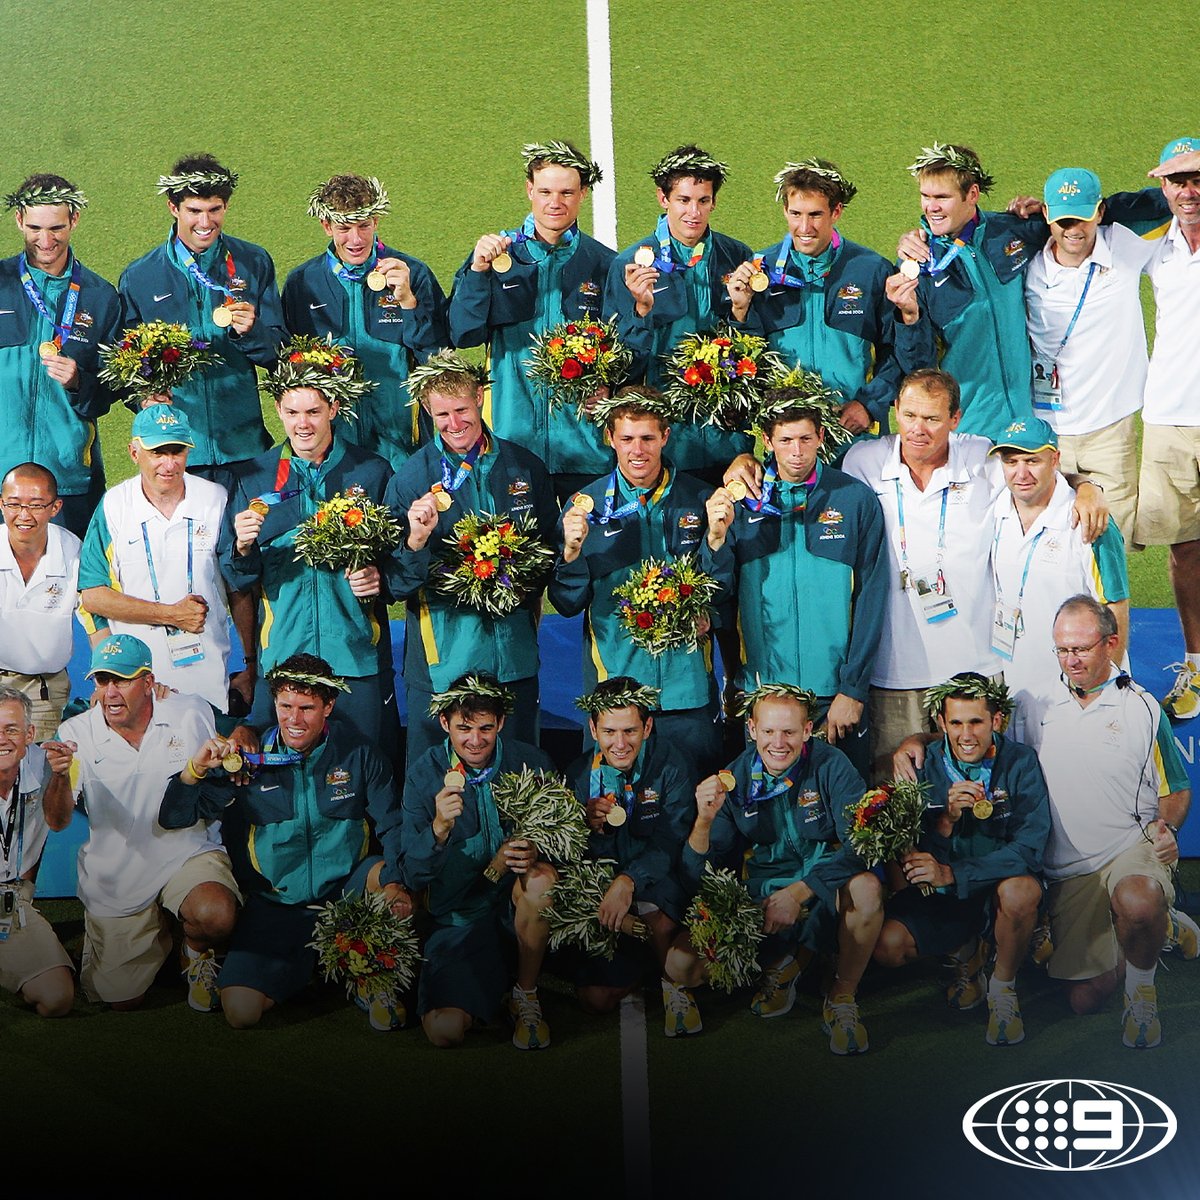 #OTD in 2004, our Kookaburras finally broke the 'curse' and won Olympic gold in Athens. 💛💚 One of the GREAT Aussie sports moments. 🇦🇺 #9WWOS #Hockey #Olympics